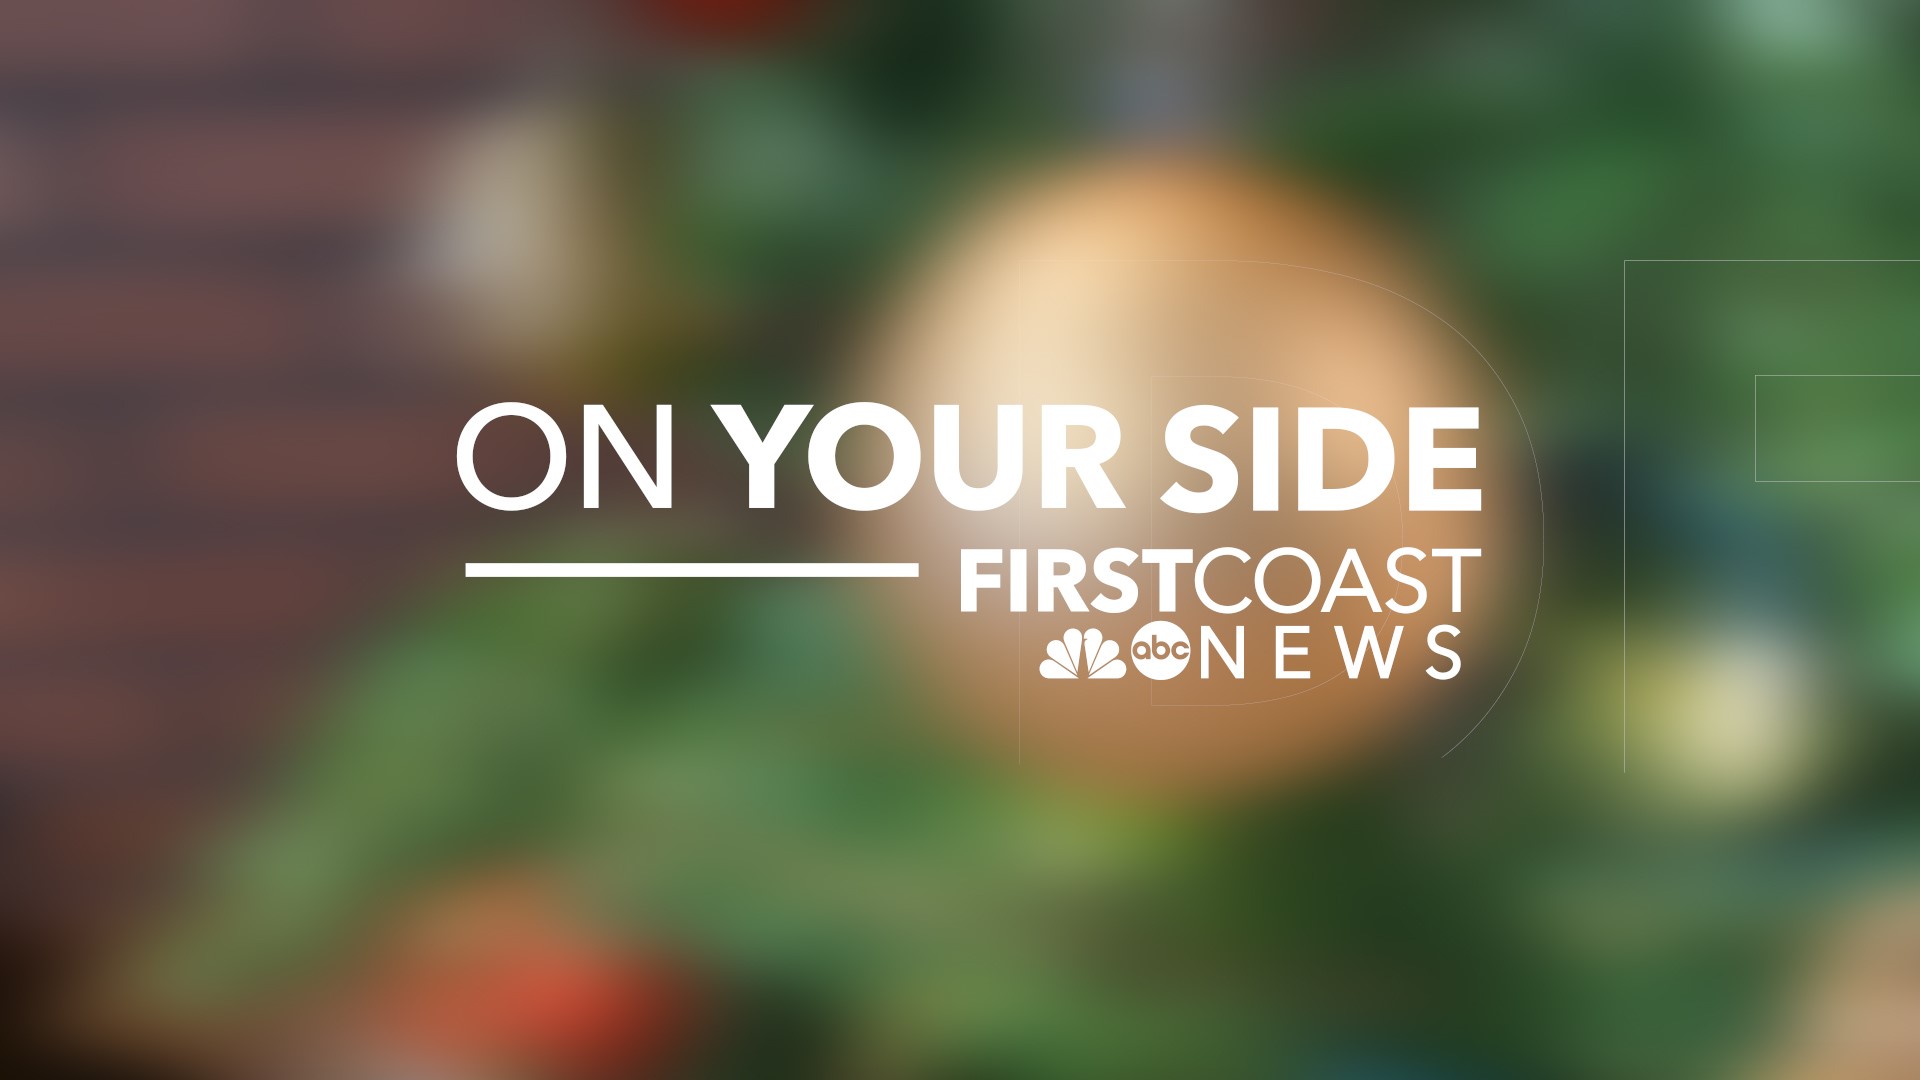 Ken Amaro is ON YOUR SIDE with a few tips to protect your money when shopping for the holidays.